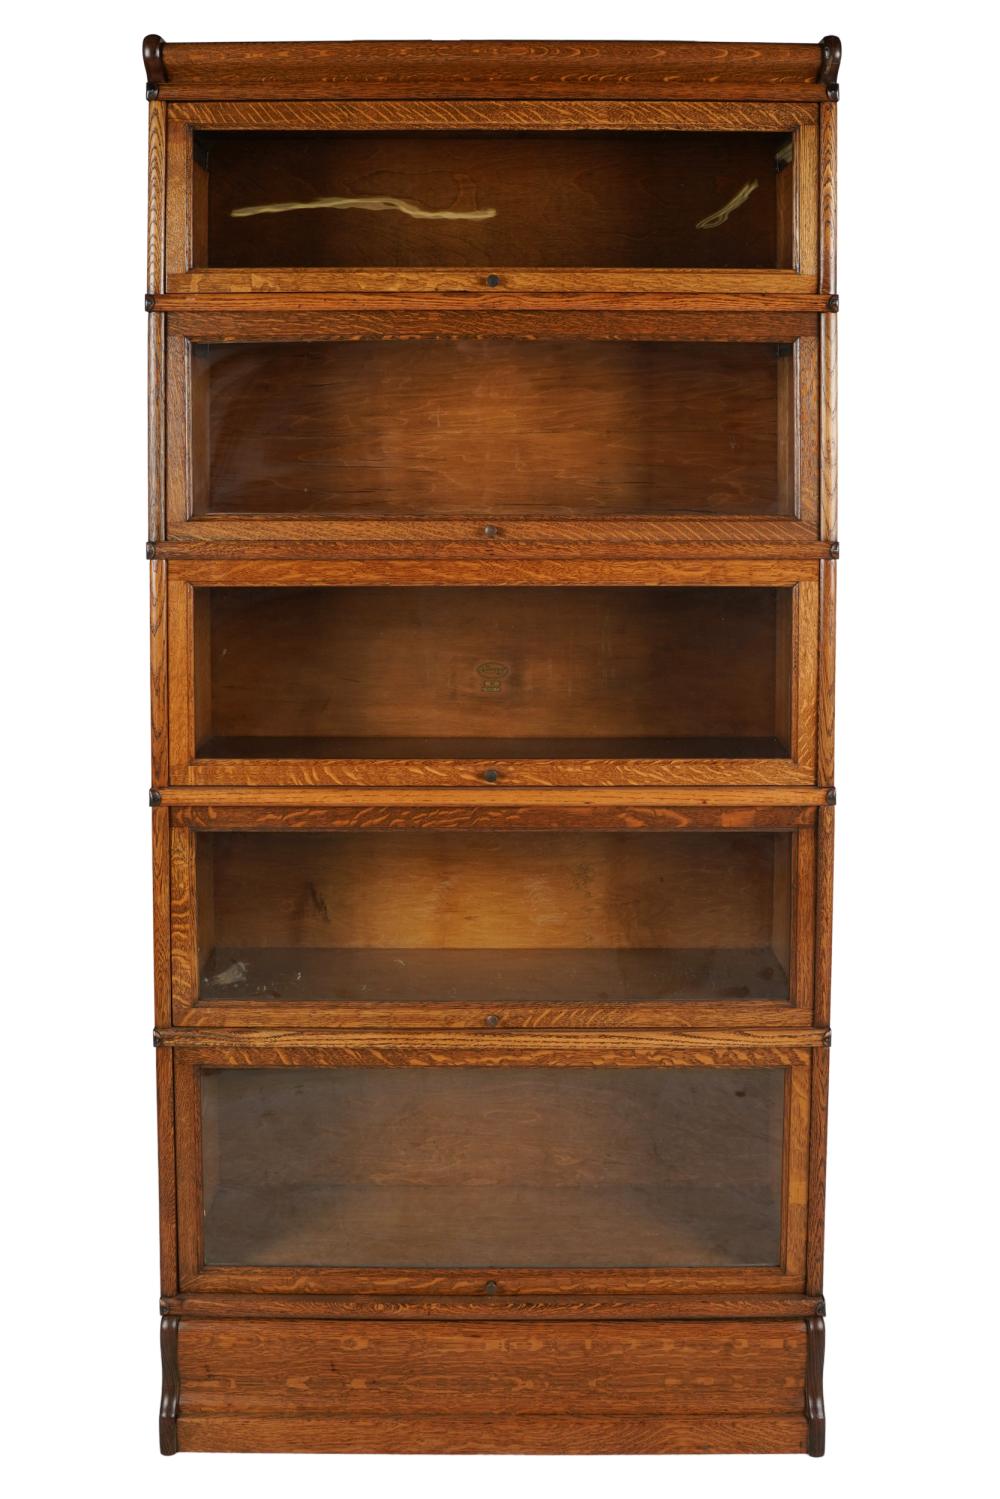 MACEY LAWYER S BOOKCASEwith five 3334d0